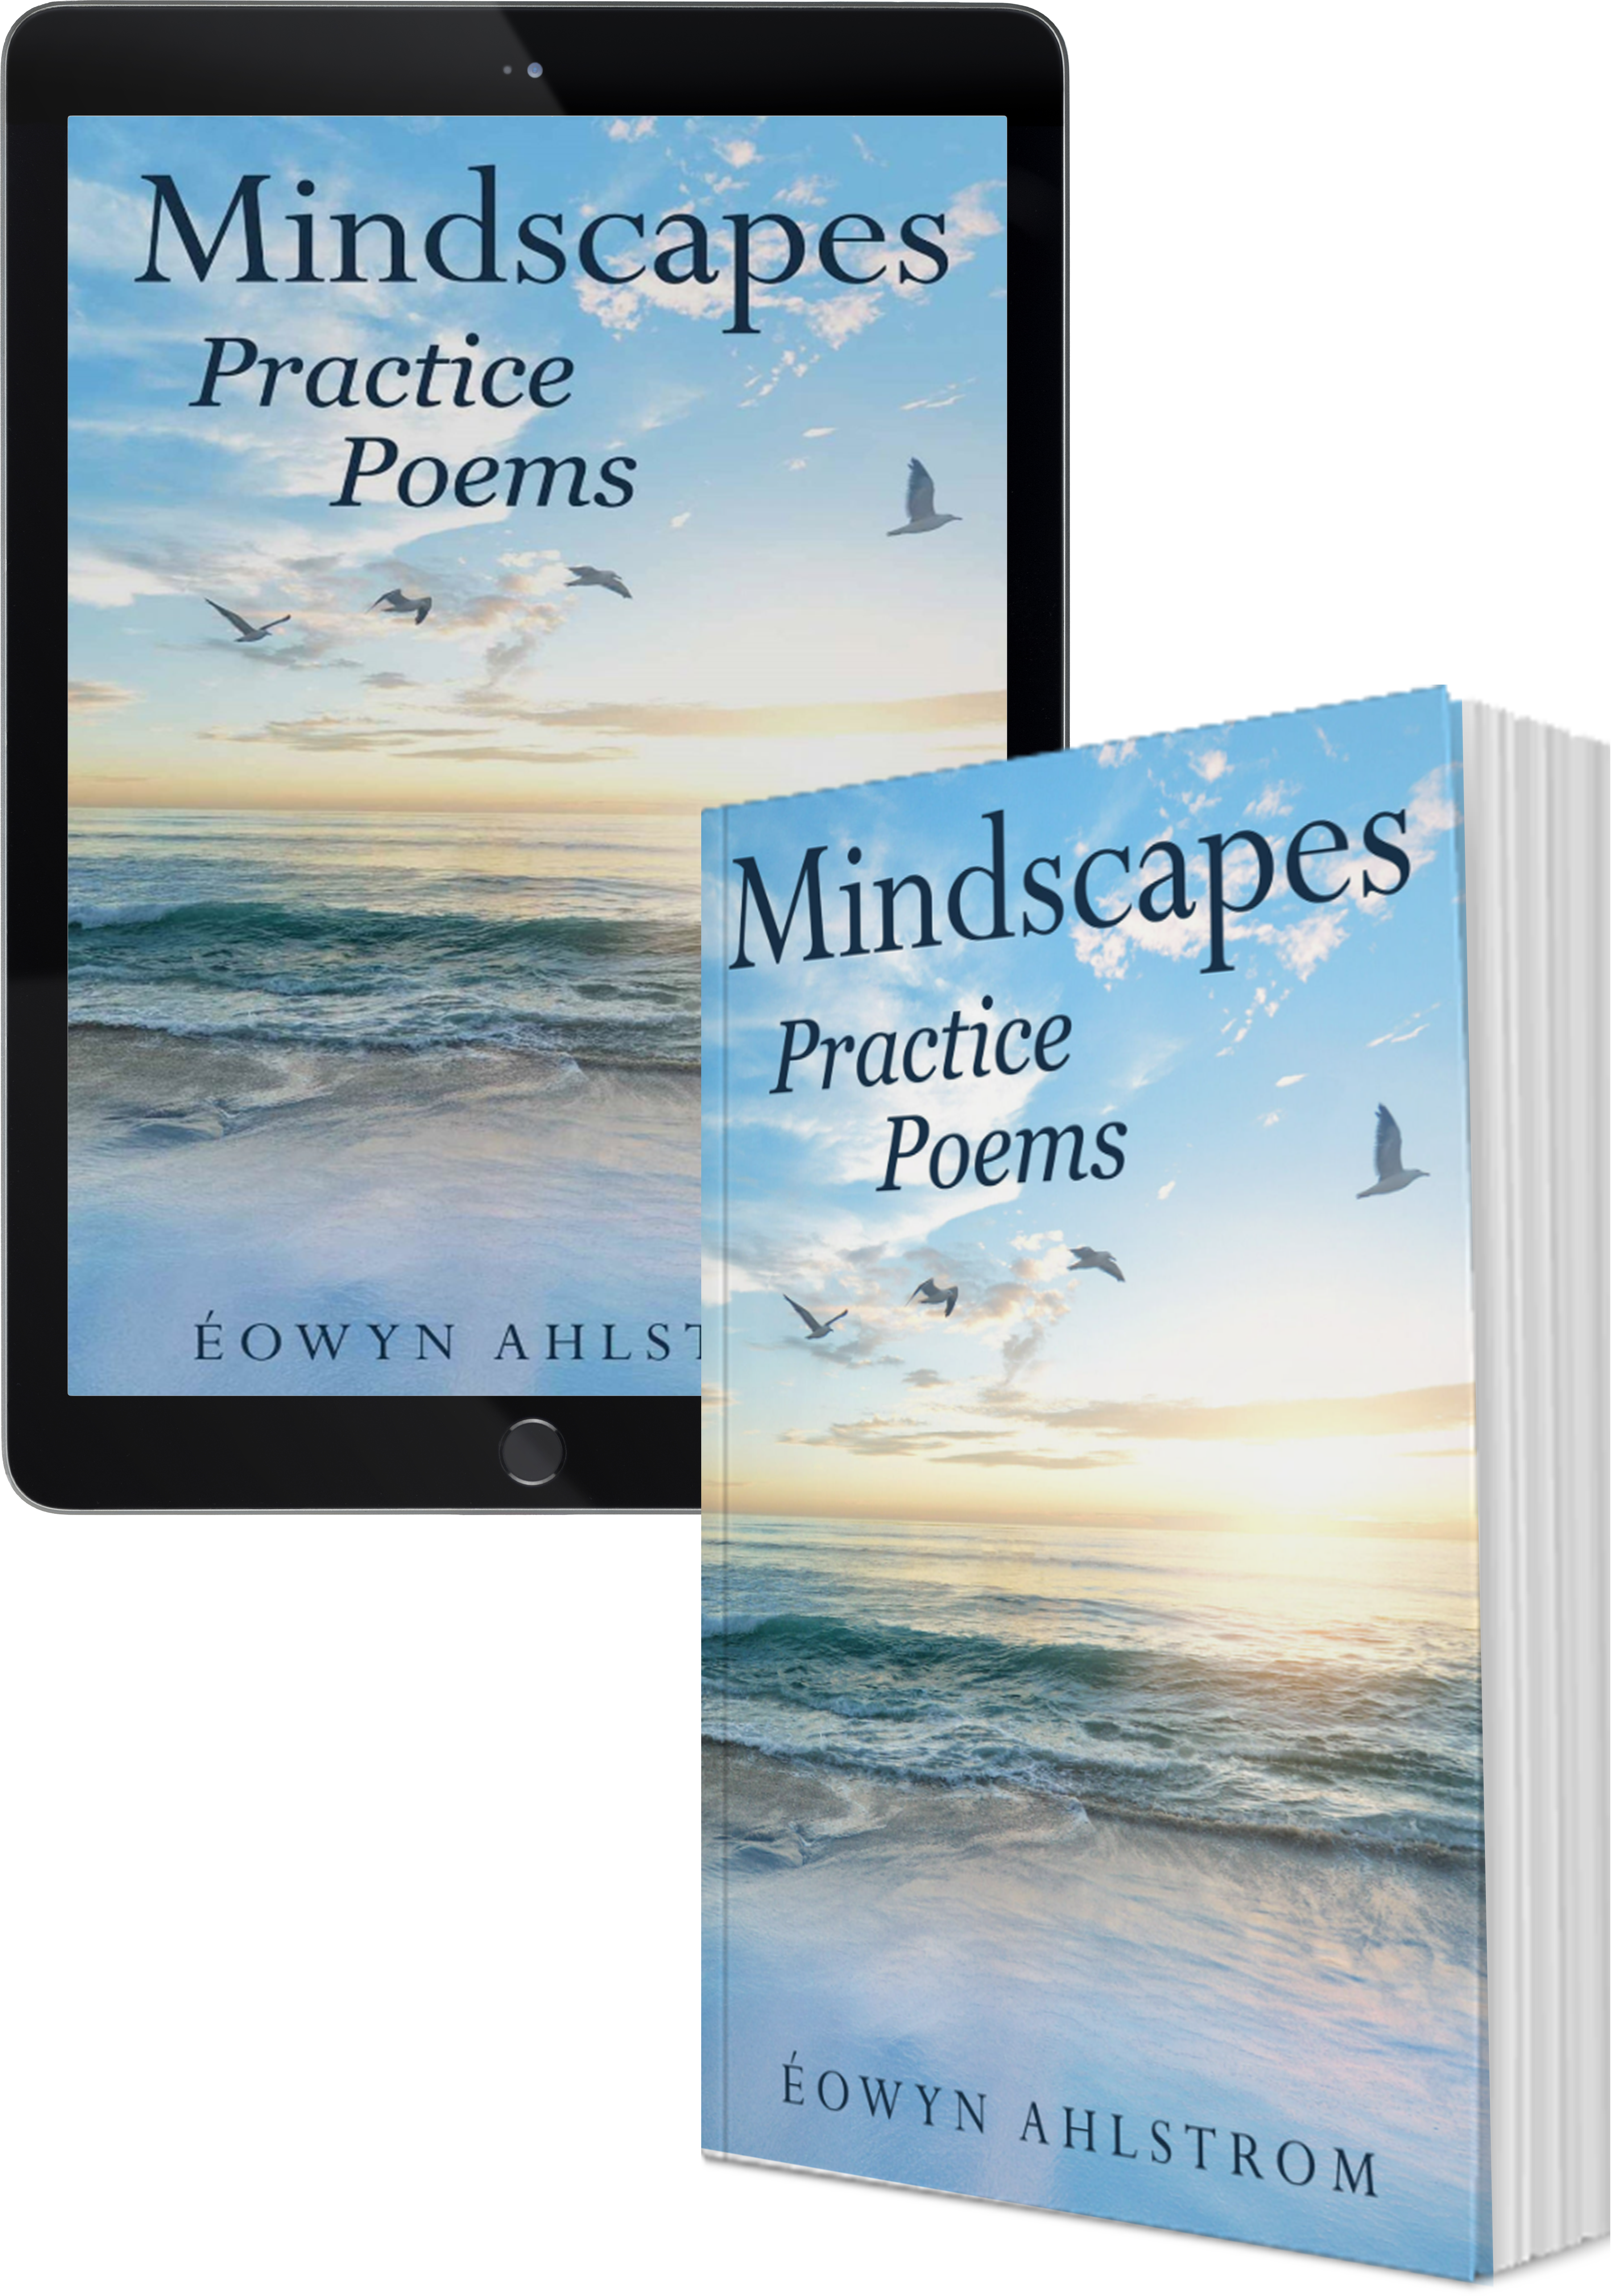 Mindscapes book of poems by Eowyn Ahlstrom